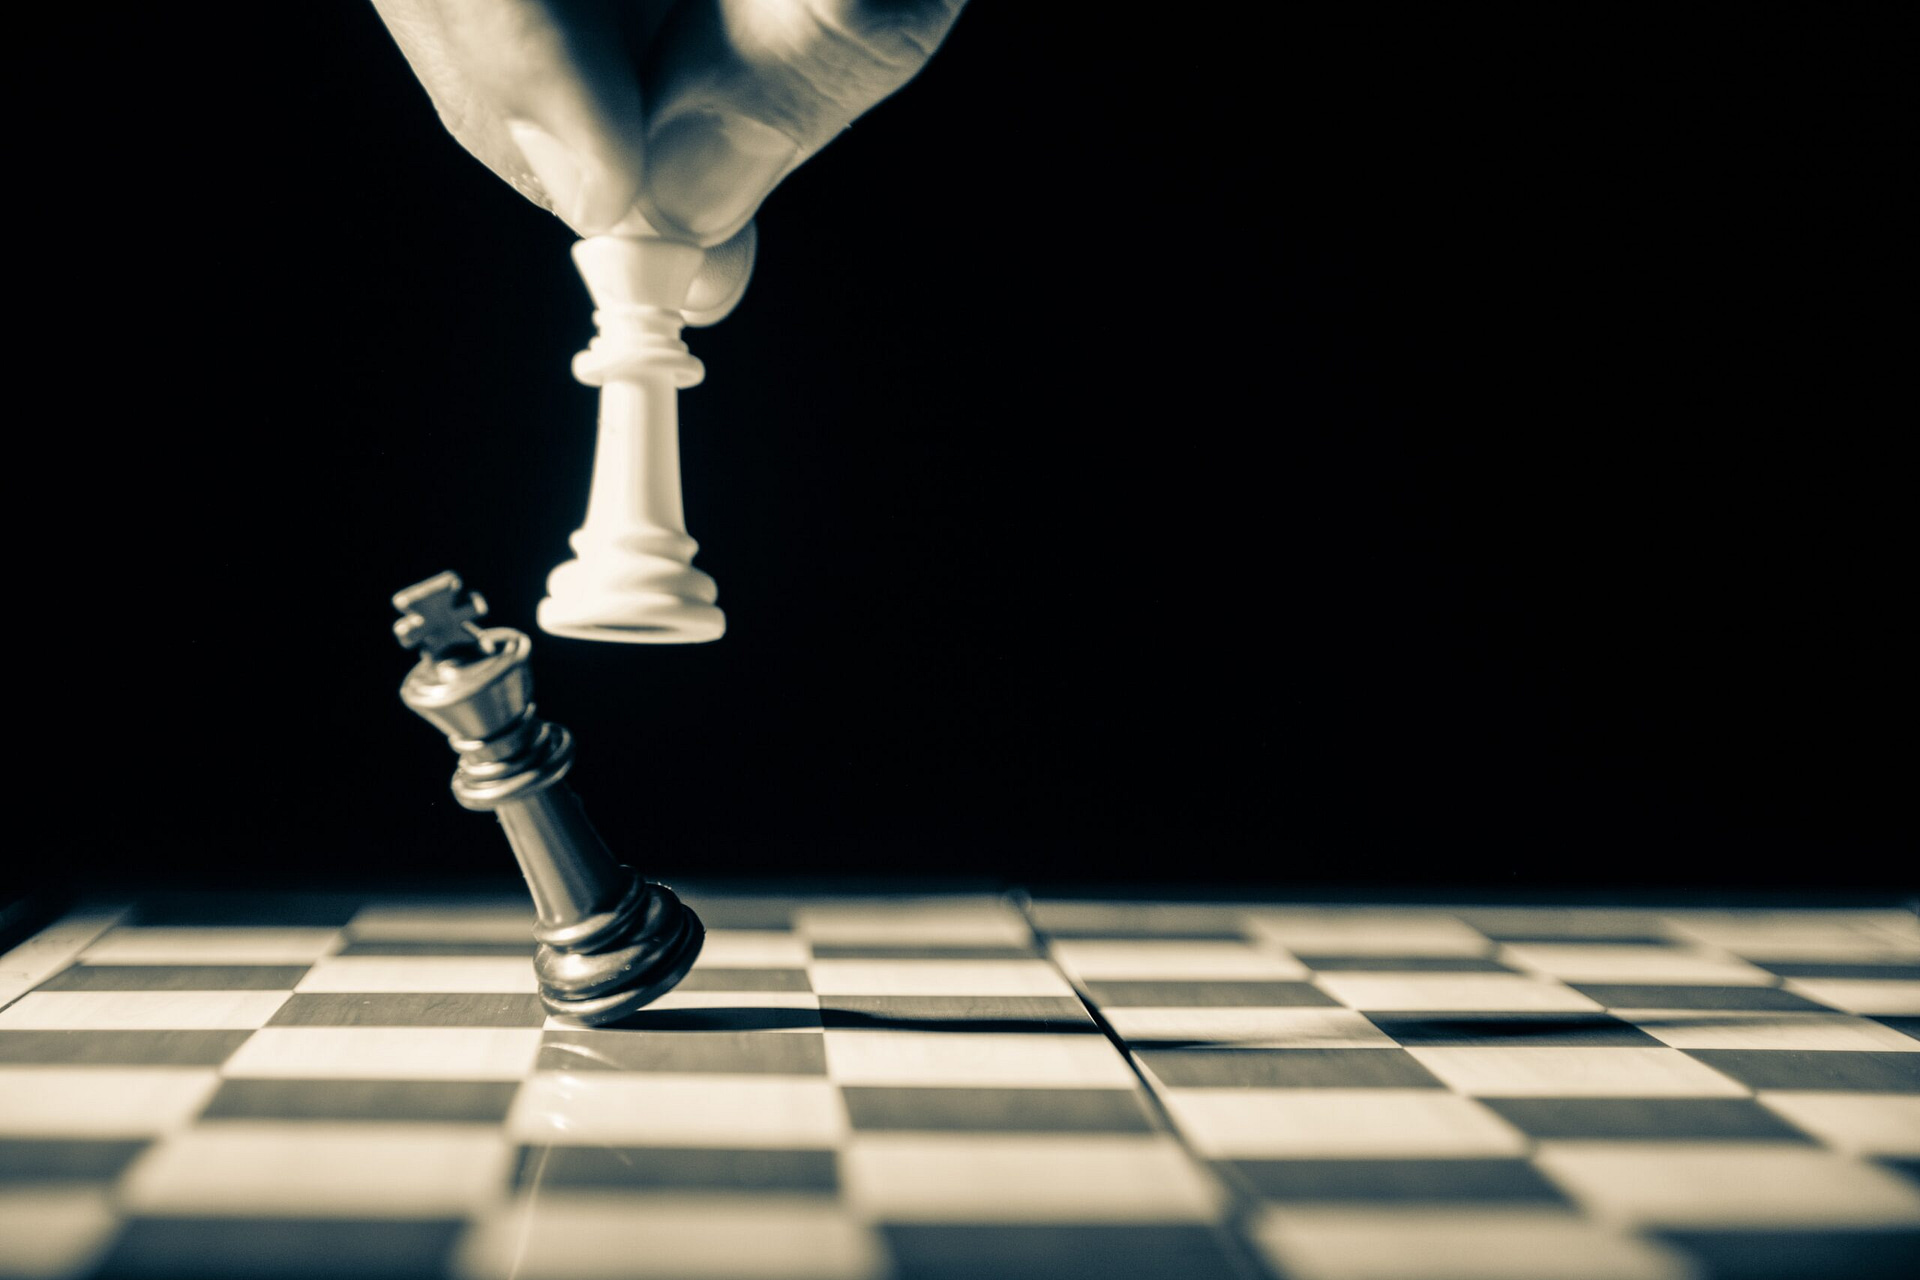 Instead of practicing, this AI mastered chess by reading about it